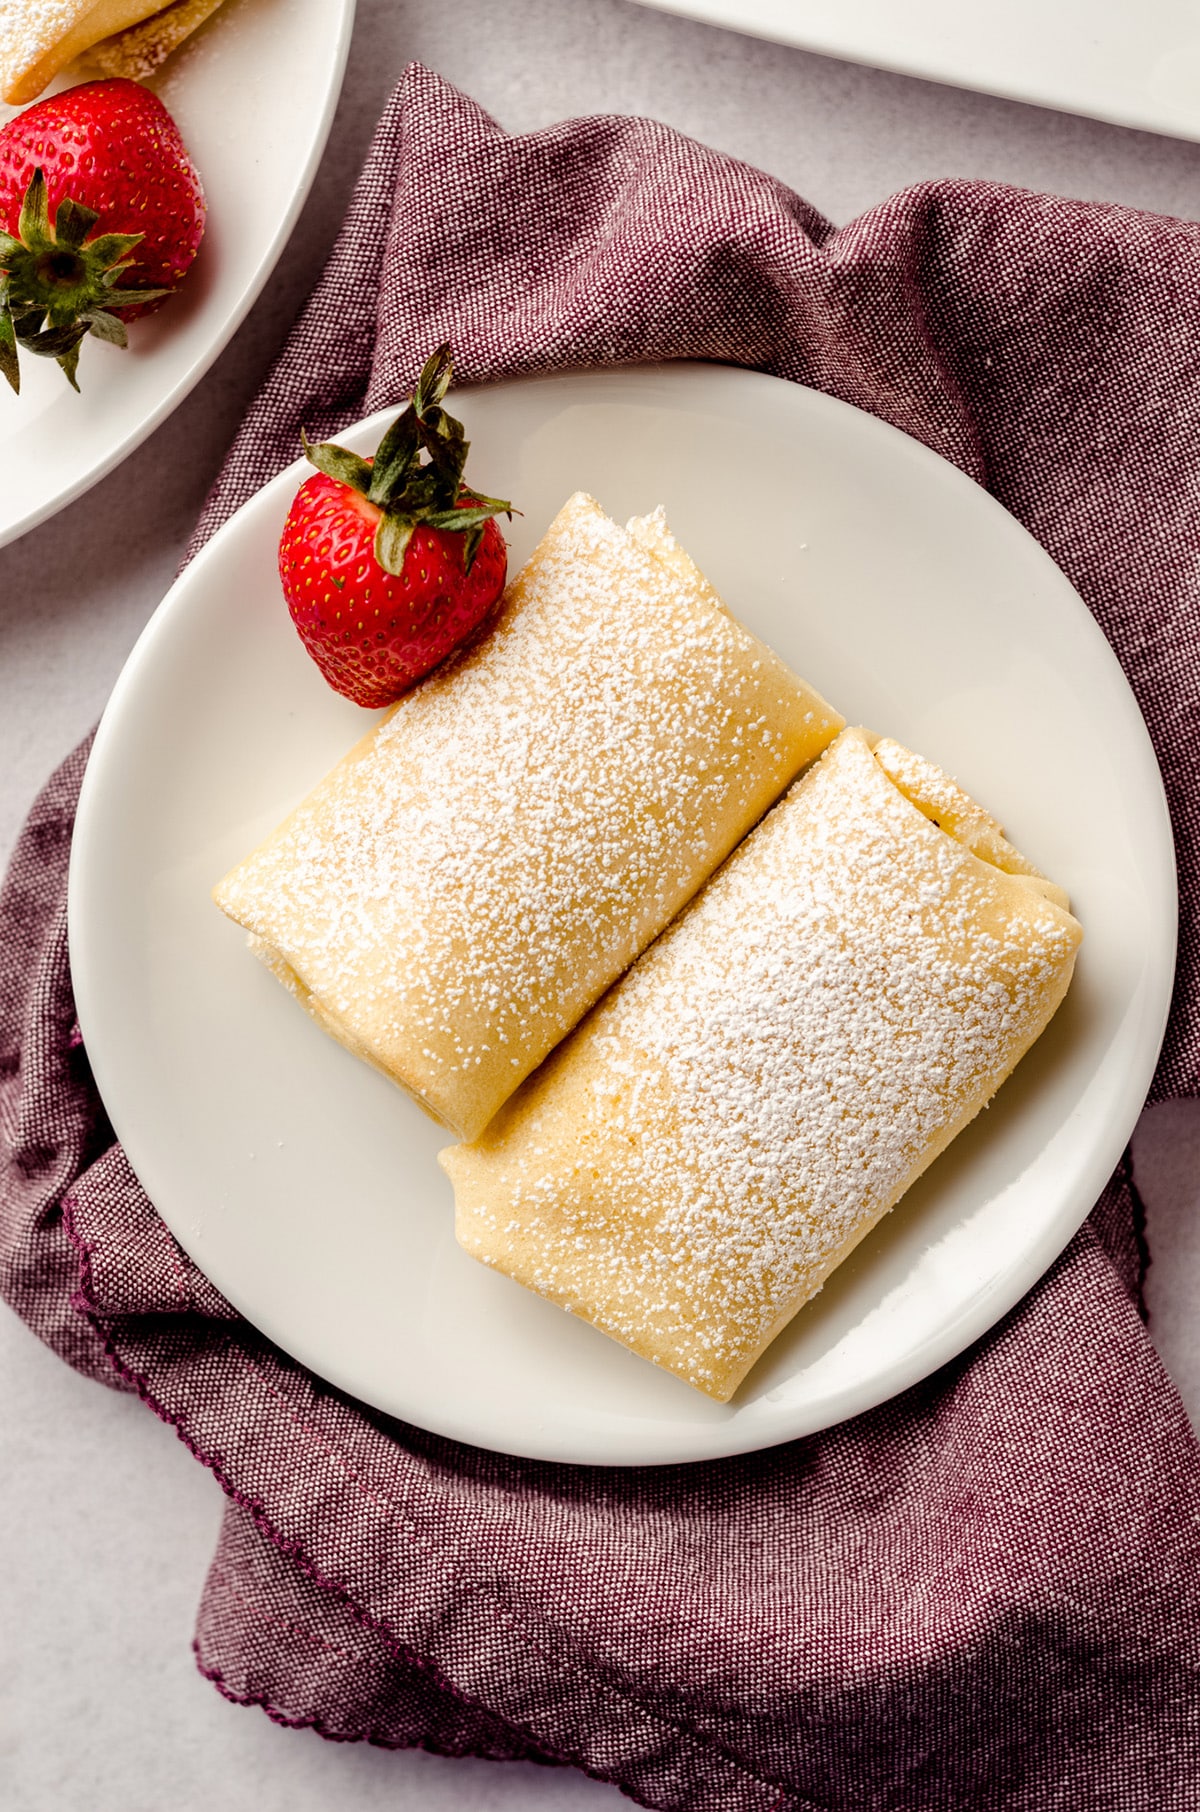 A overhead shot of a two rolled blintzes on a white plate, garnished with a single strawberry.